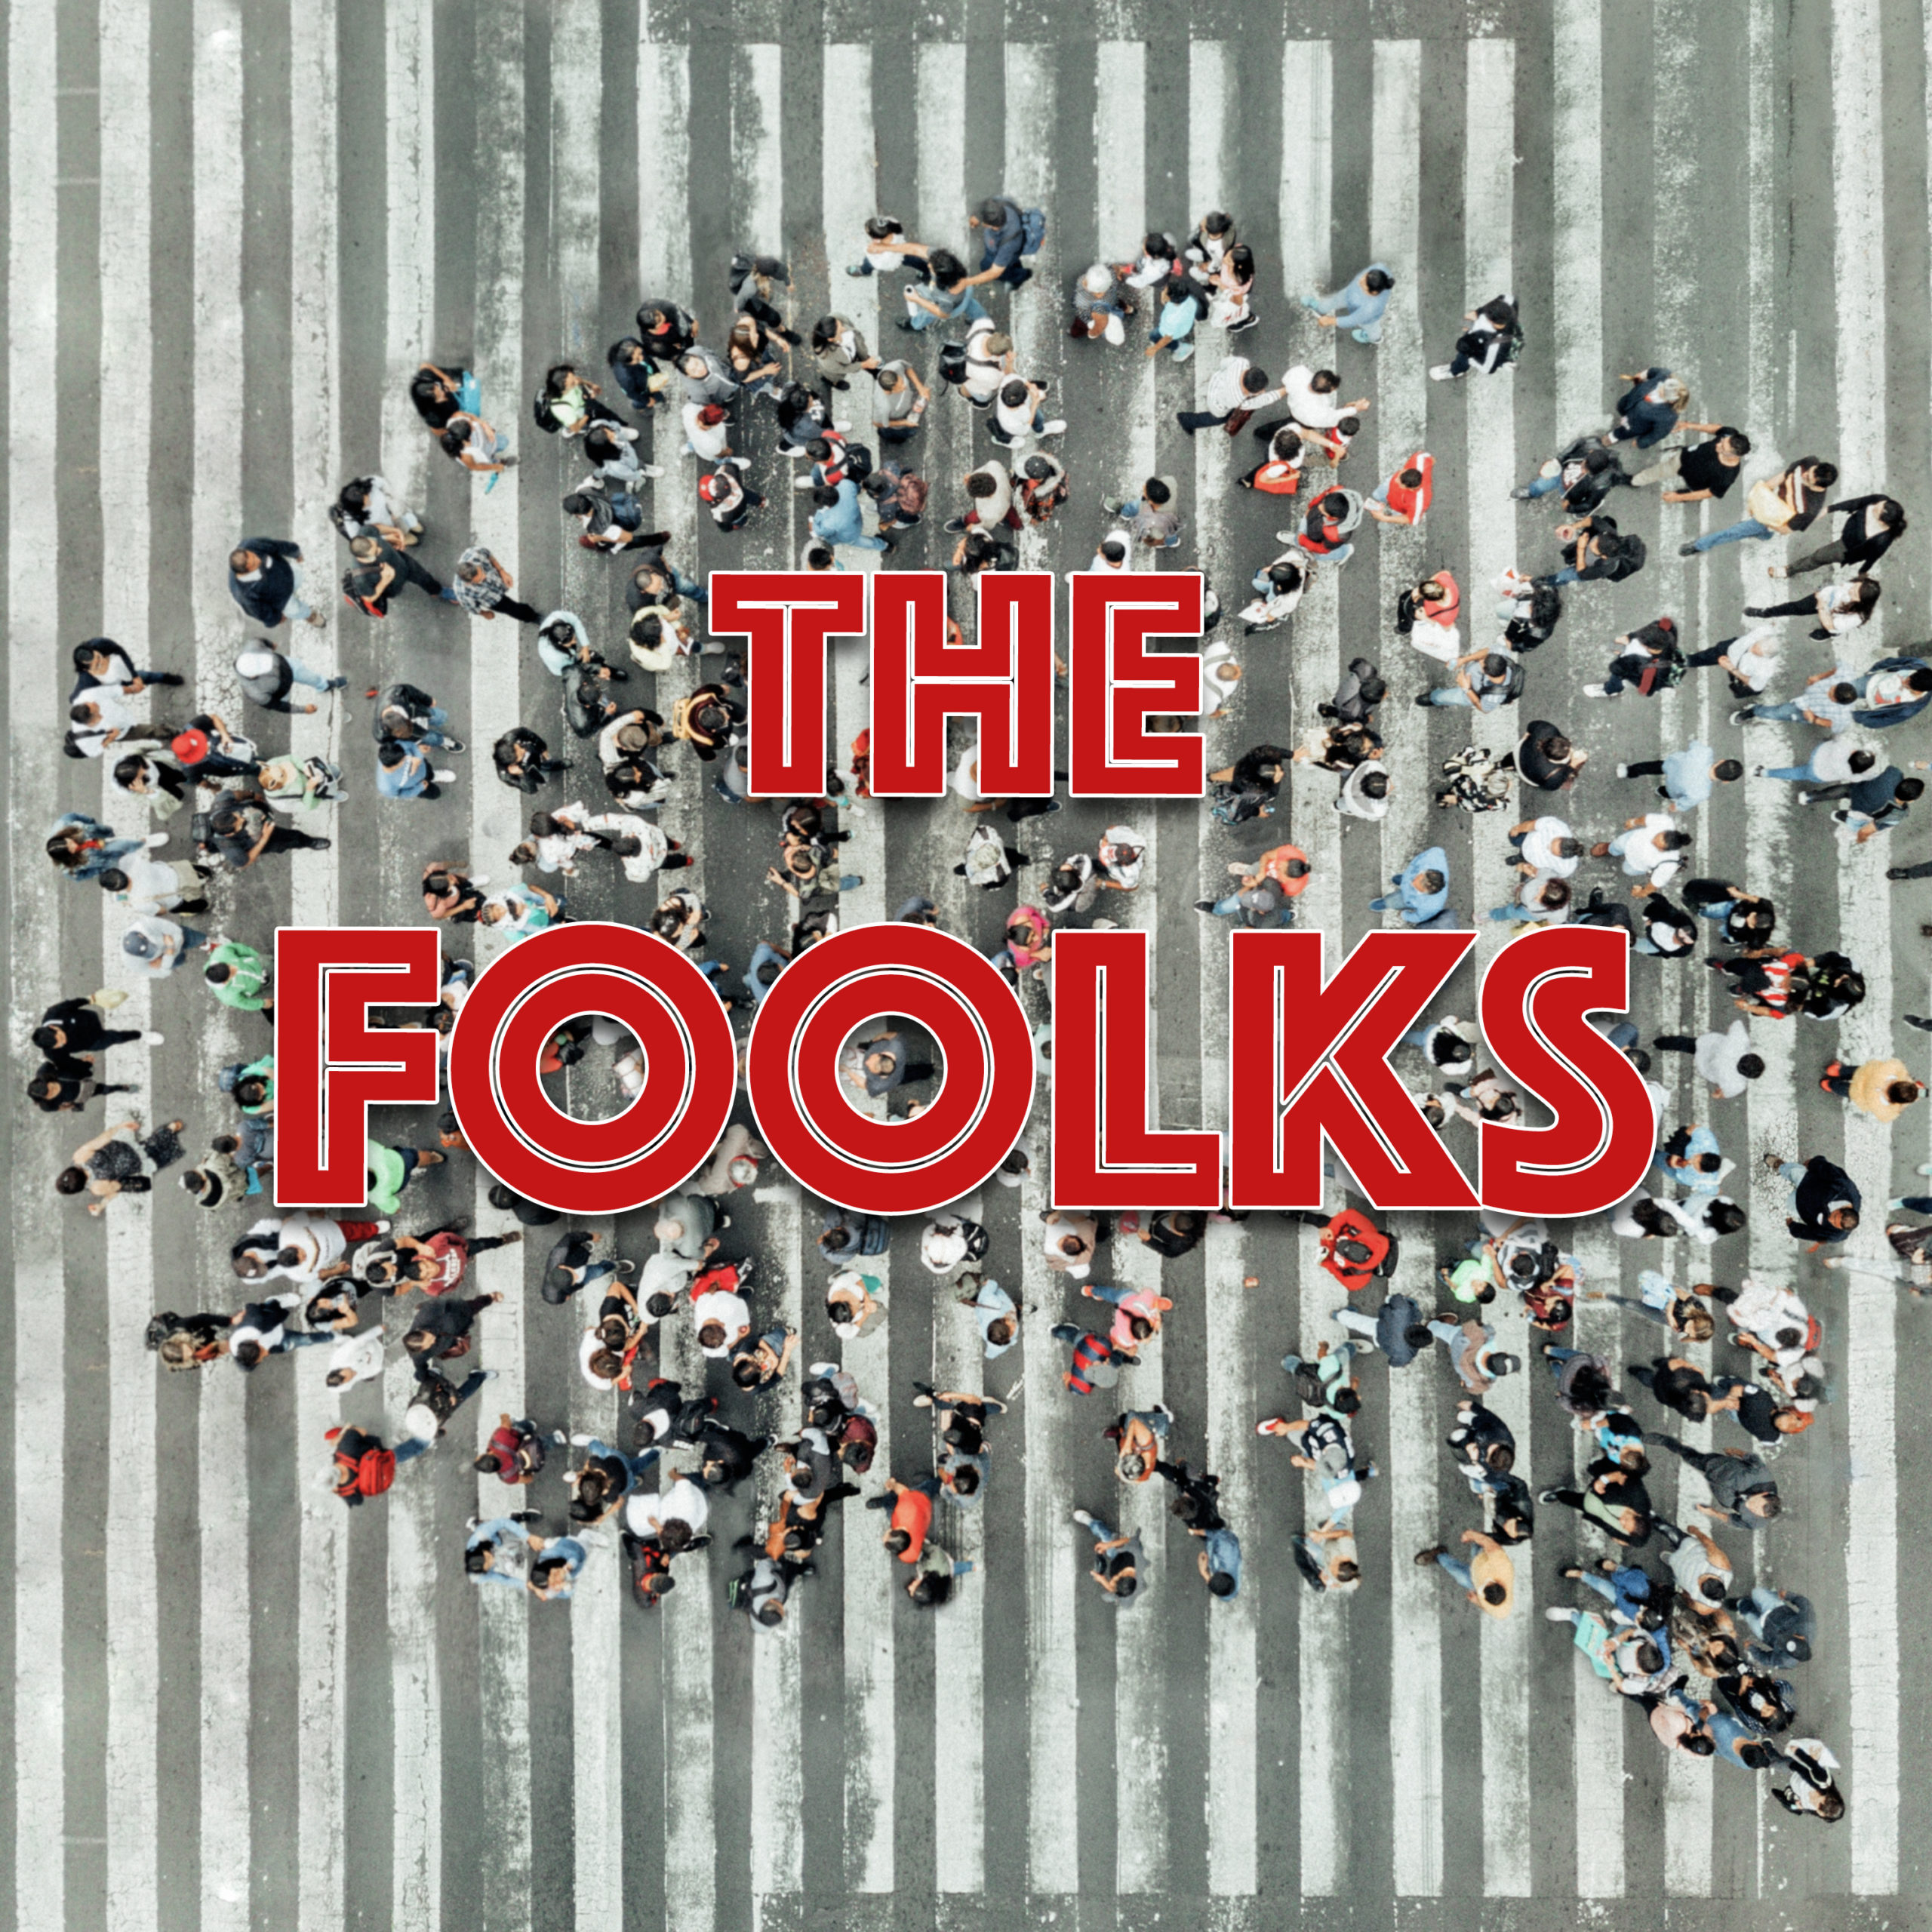 The Foolks